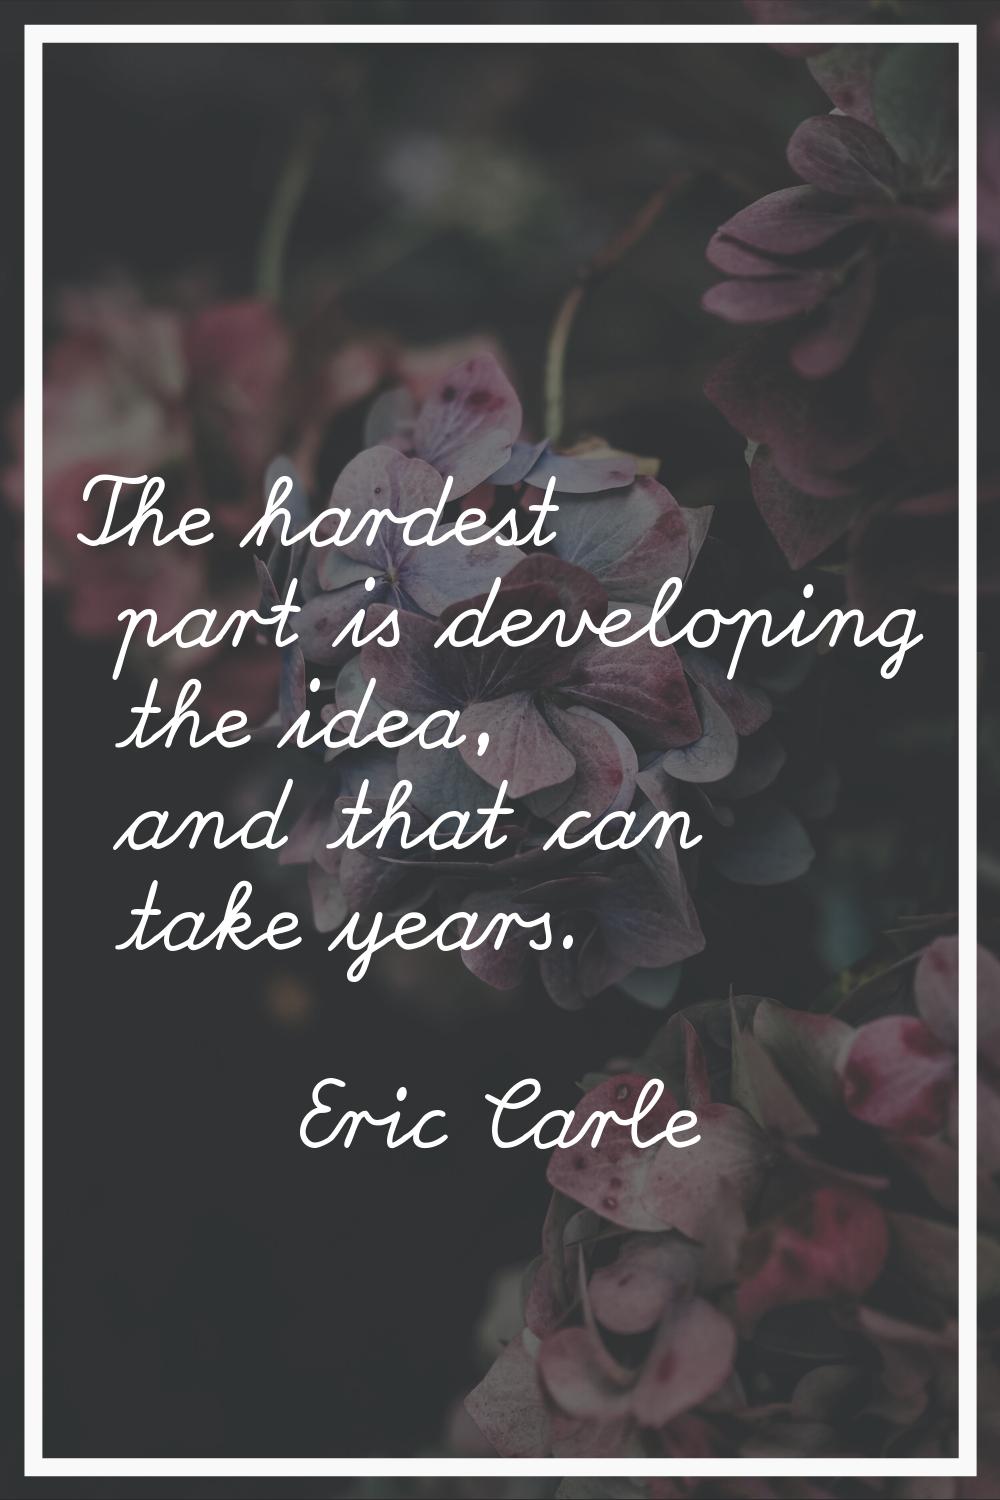 The hardest part is developing the idea, and that can take years.